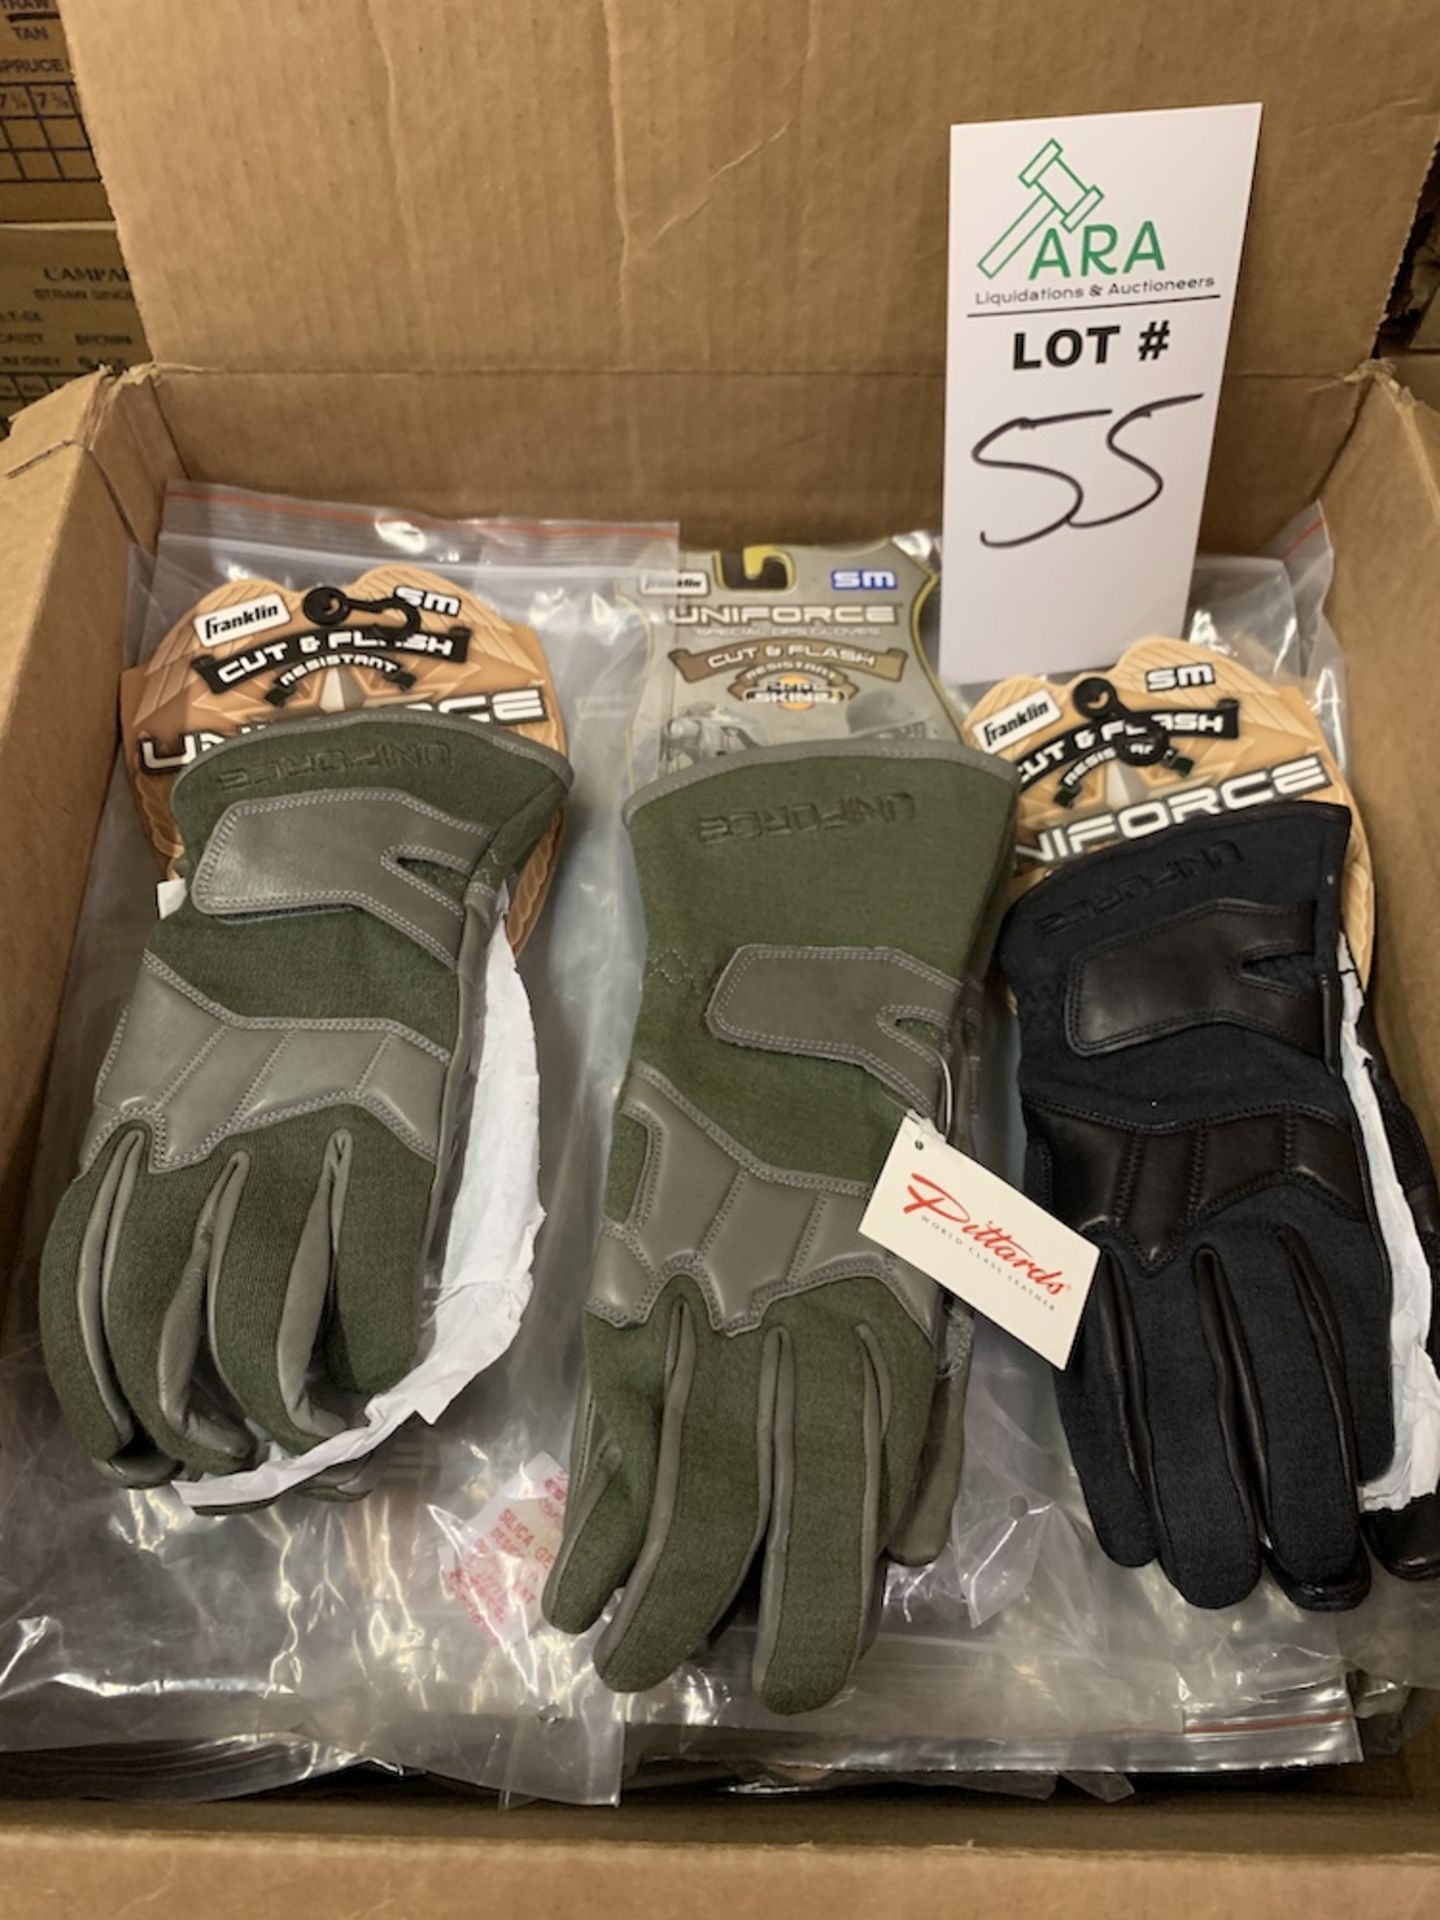 29 Pairs of Franklin Uniforce Gloves, High Performance 2nd Skinz Sml, Three Styles, New in Pack